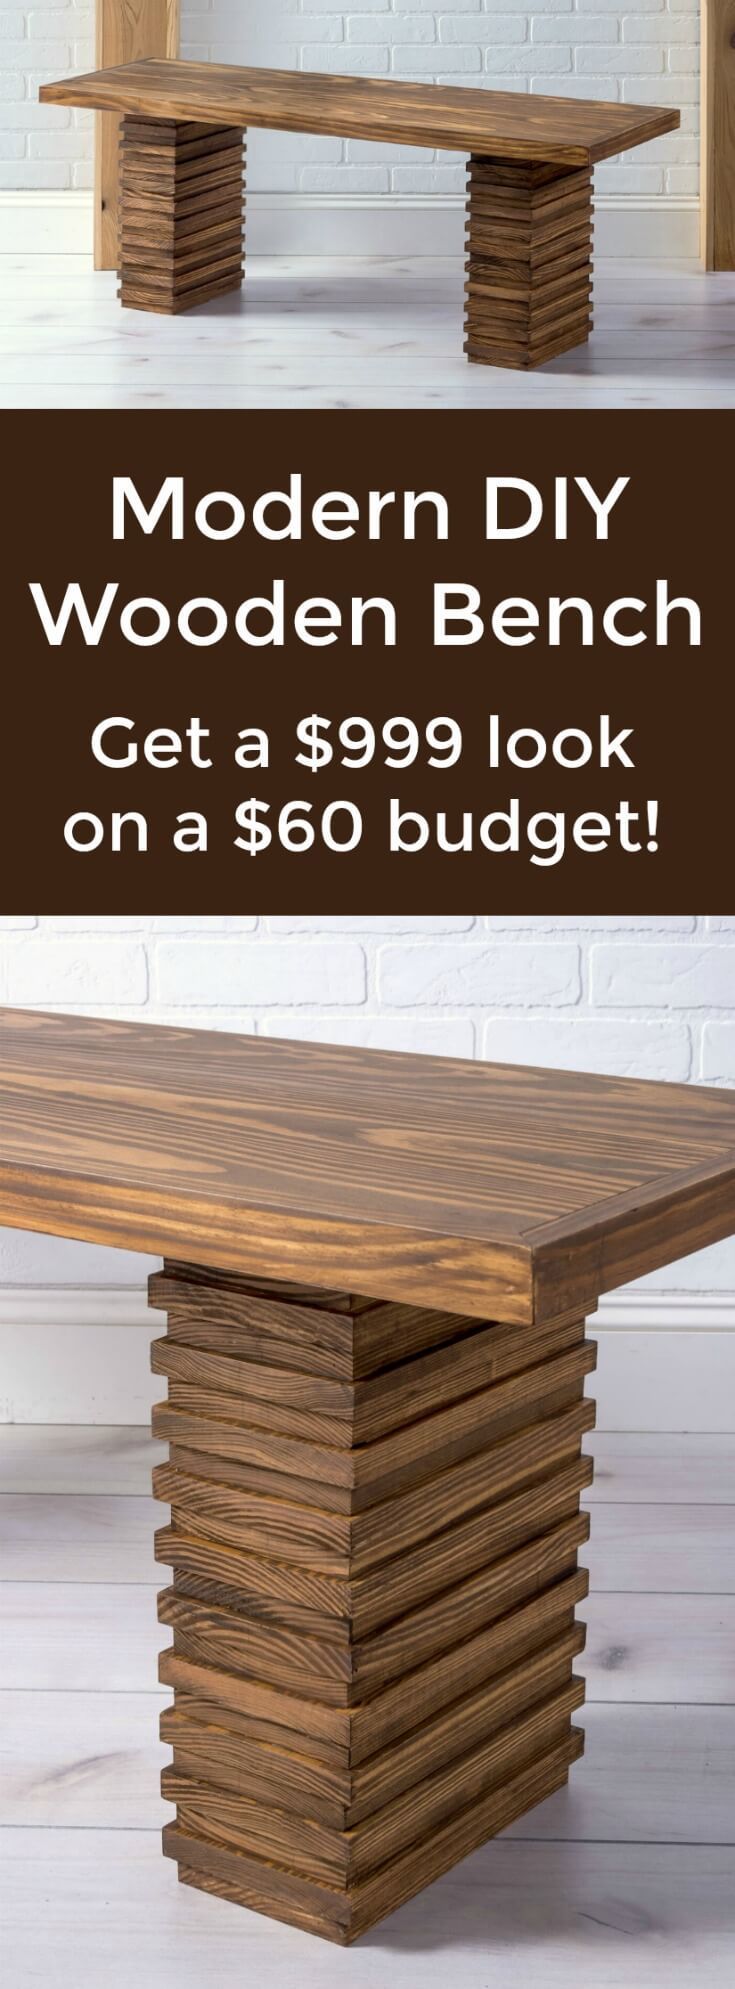 Crate and Barrel Inspired Modern Wooden Bench